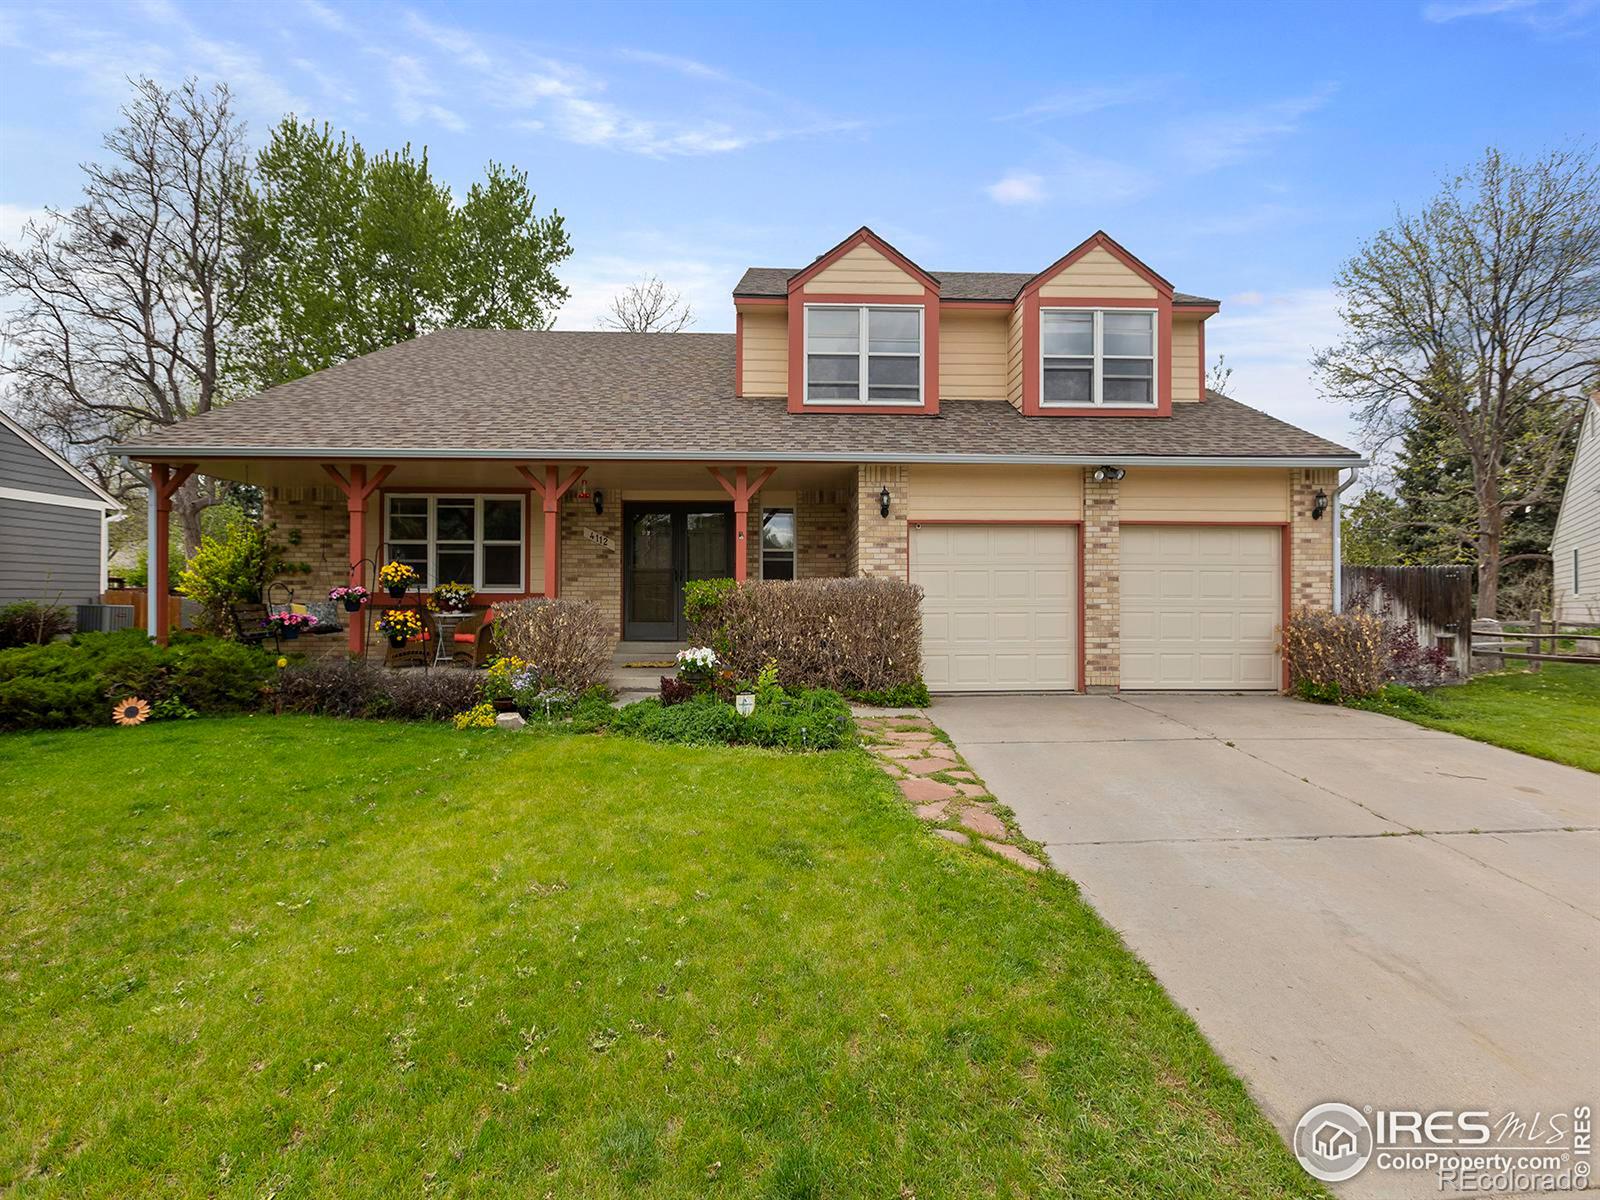 4112  Sumter Square, fort collins MLS: 4567891009703 Beds: 5 Baths: 4 Price: $675,000